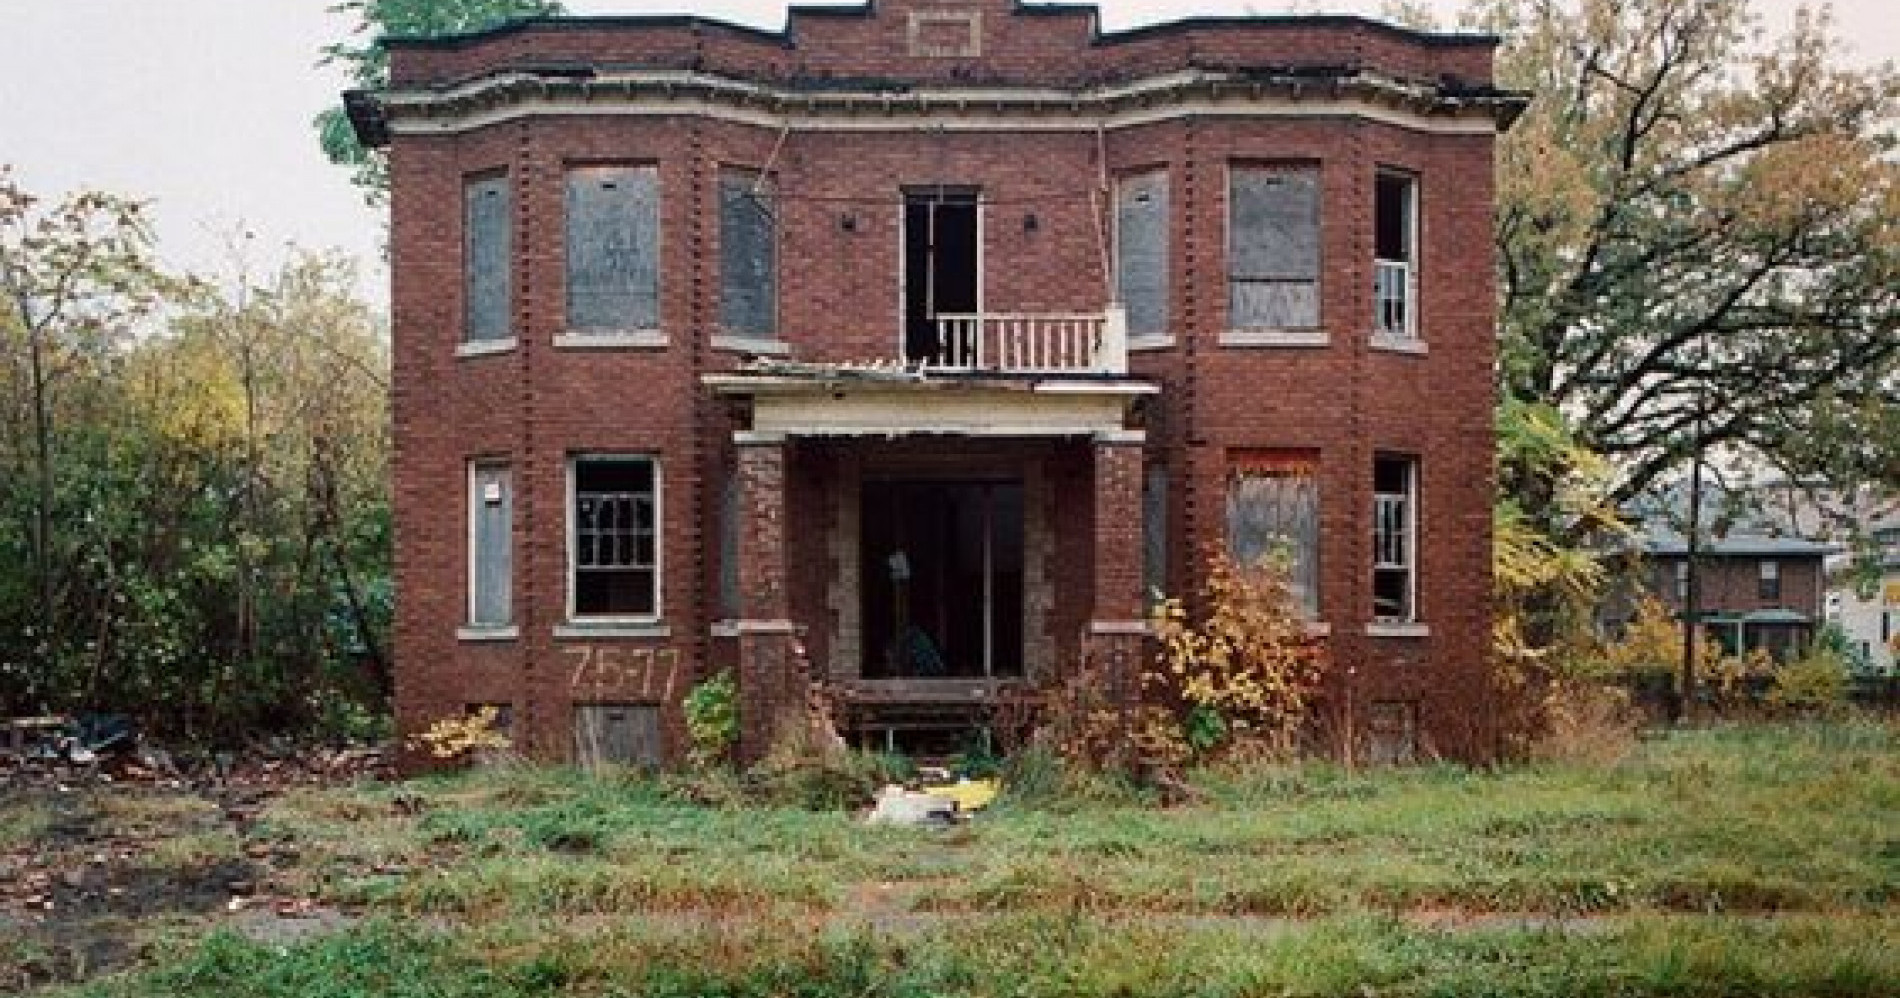 Detroit Will PAY You To Take One Of These 100 Abandoned Homes (businessinsider.com)